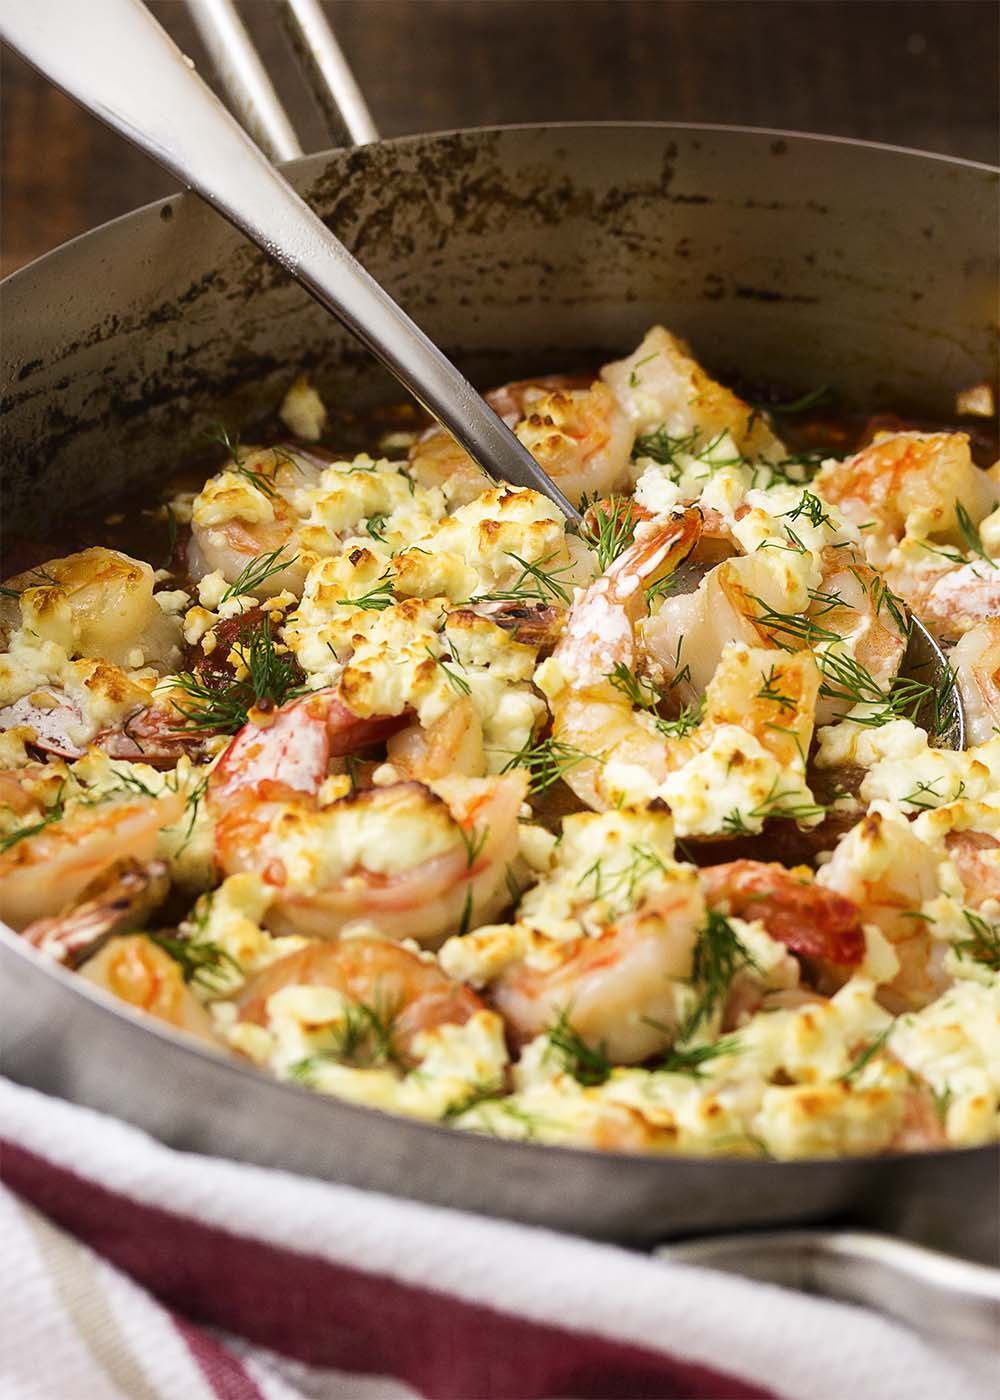 Juicy, plump shrimp are flambeed in brandy then topped with feta before being broiled over a bed of tomatoes in this classic Greek dish! | justalittlebitofbacon.com